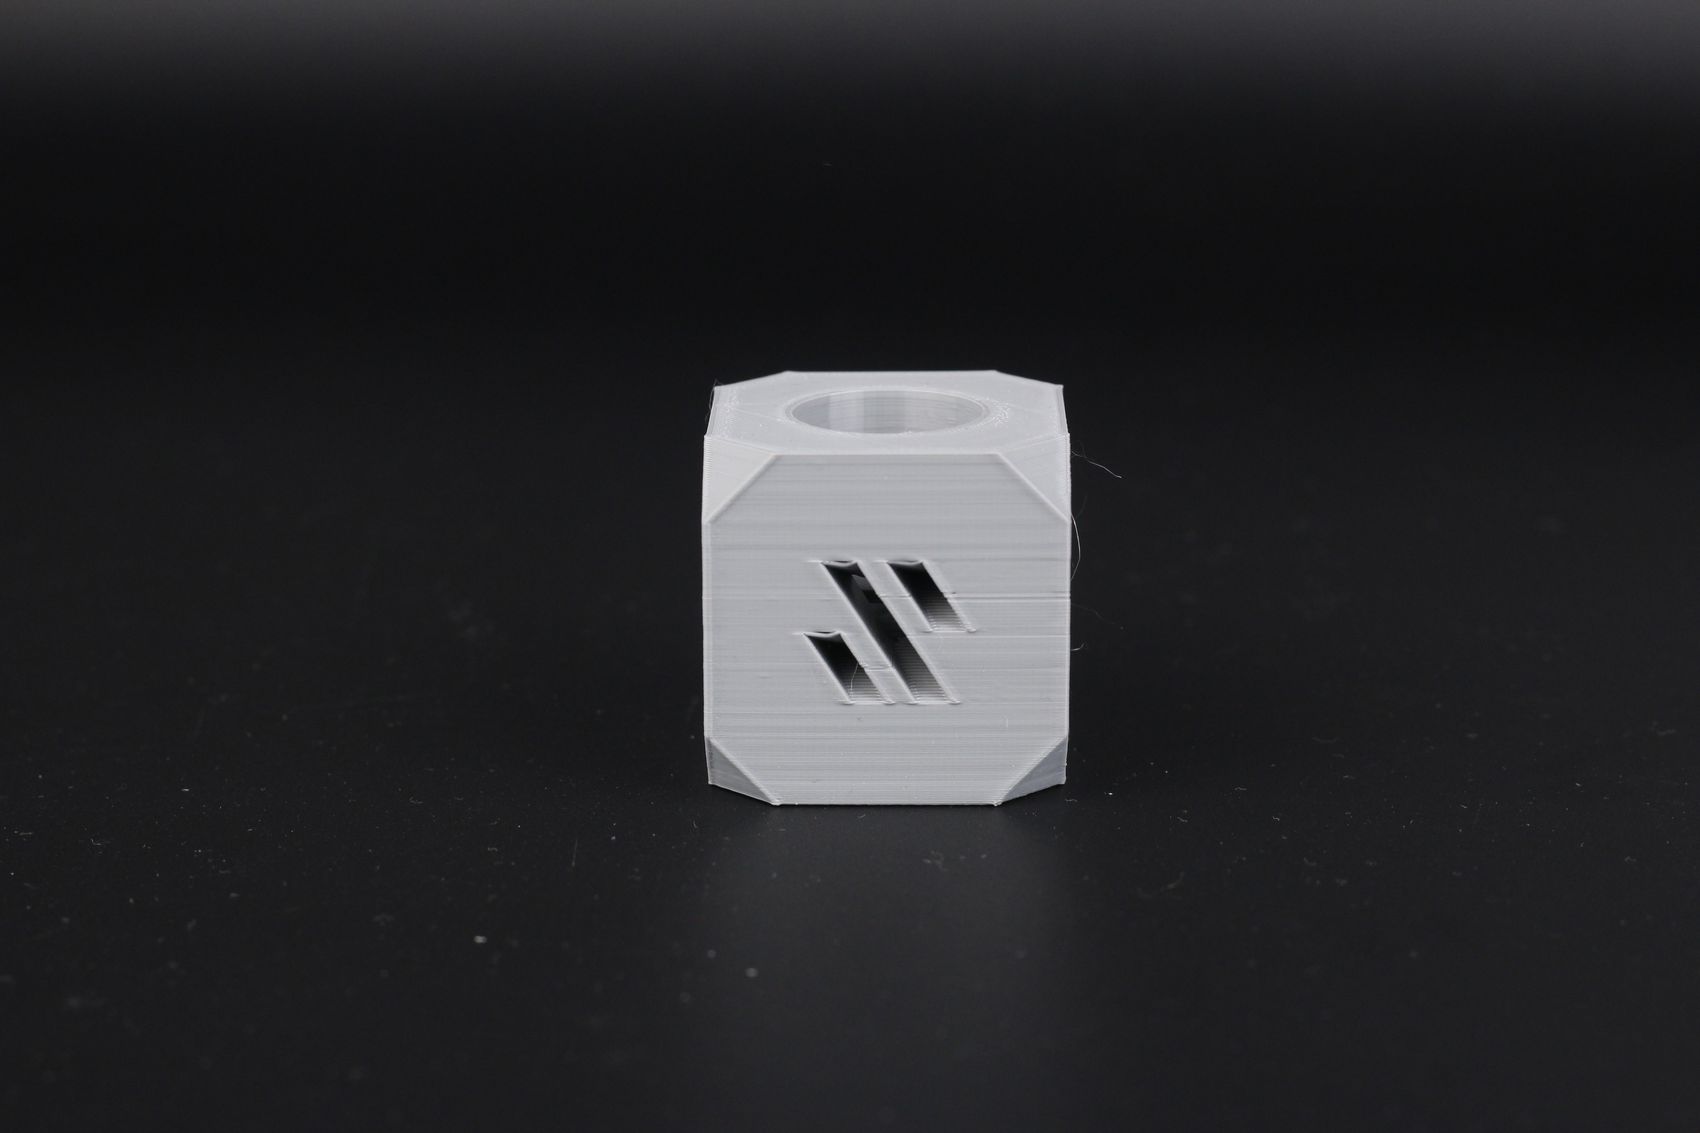 Voron Calibration Cube on Anycubic Kobra Plus3 | Anycubic Kobra Plus Review: A Larger Vyper